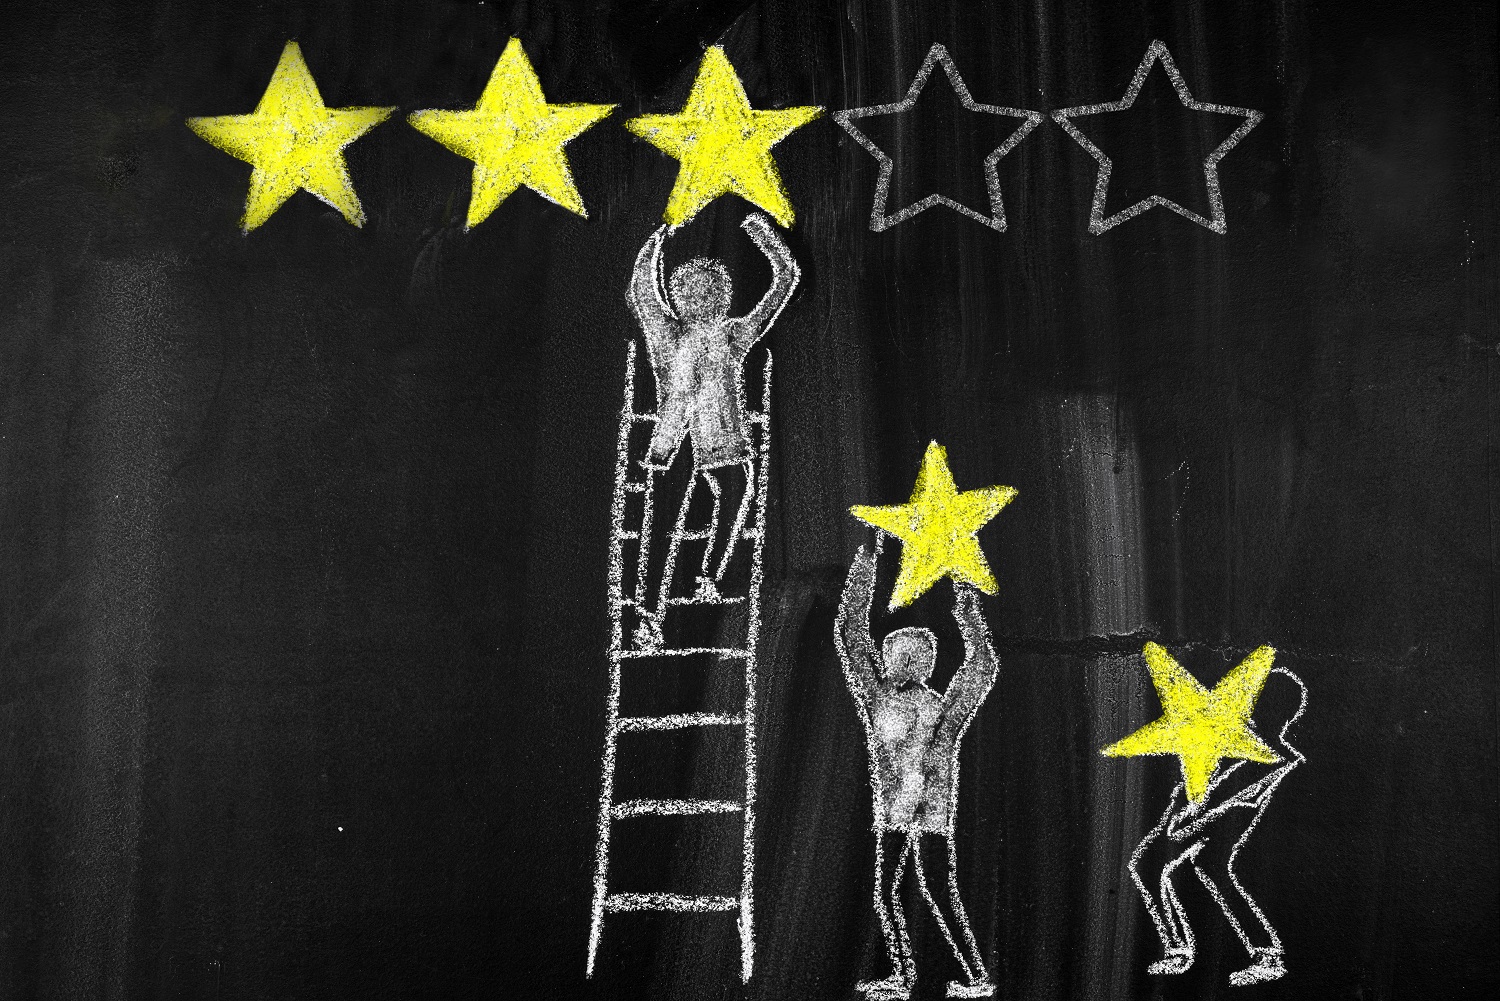 Whiteboard, three painted humansattaching stars to a board